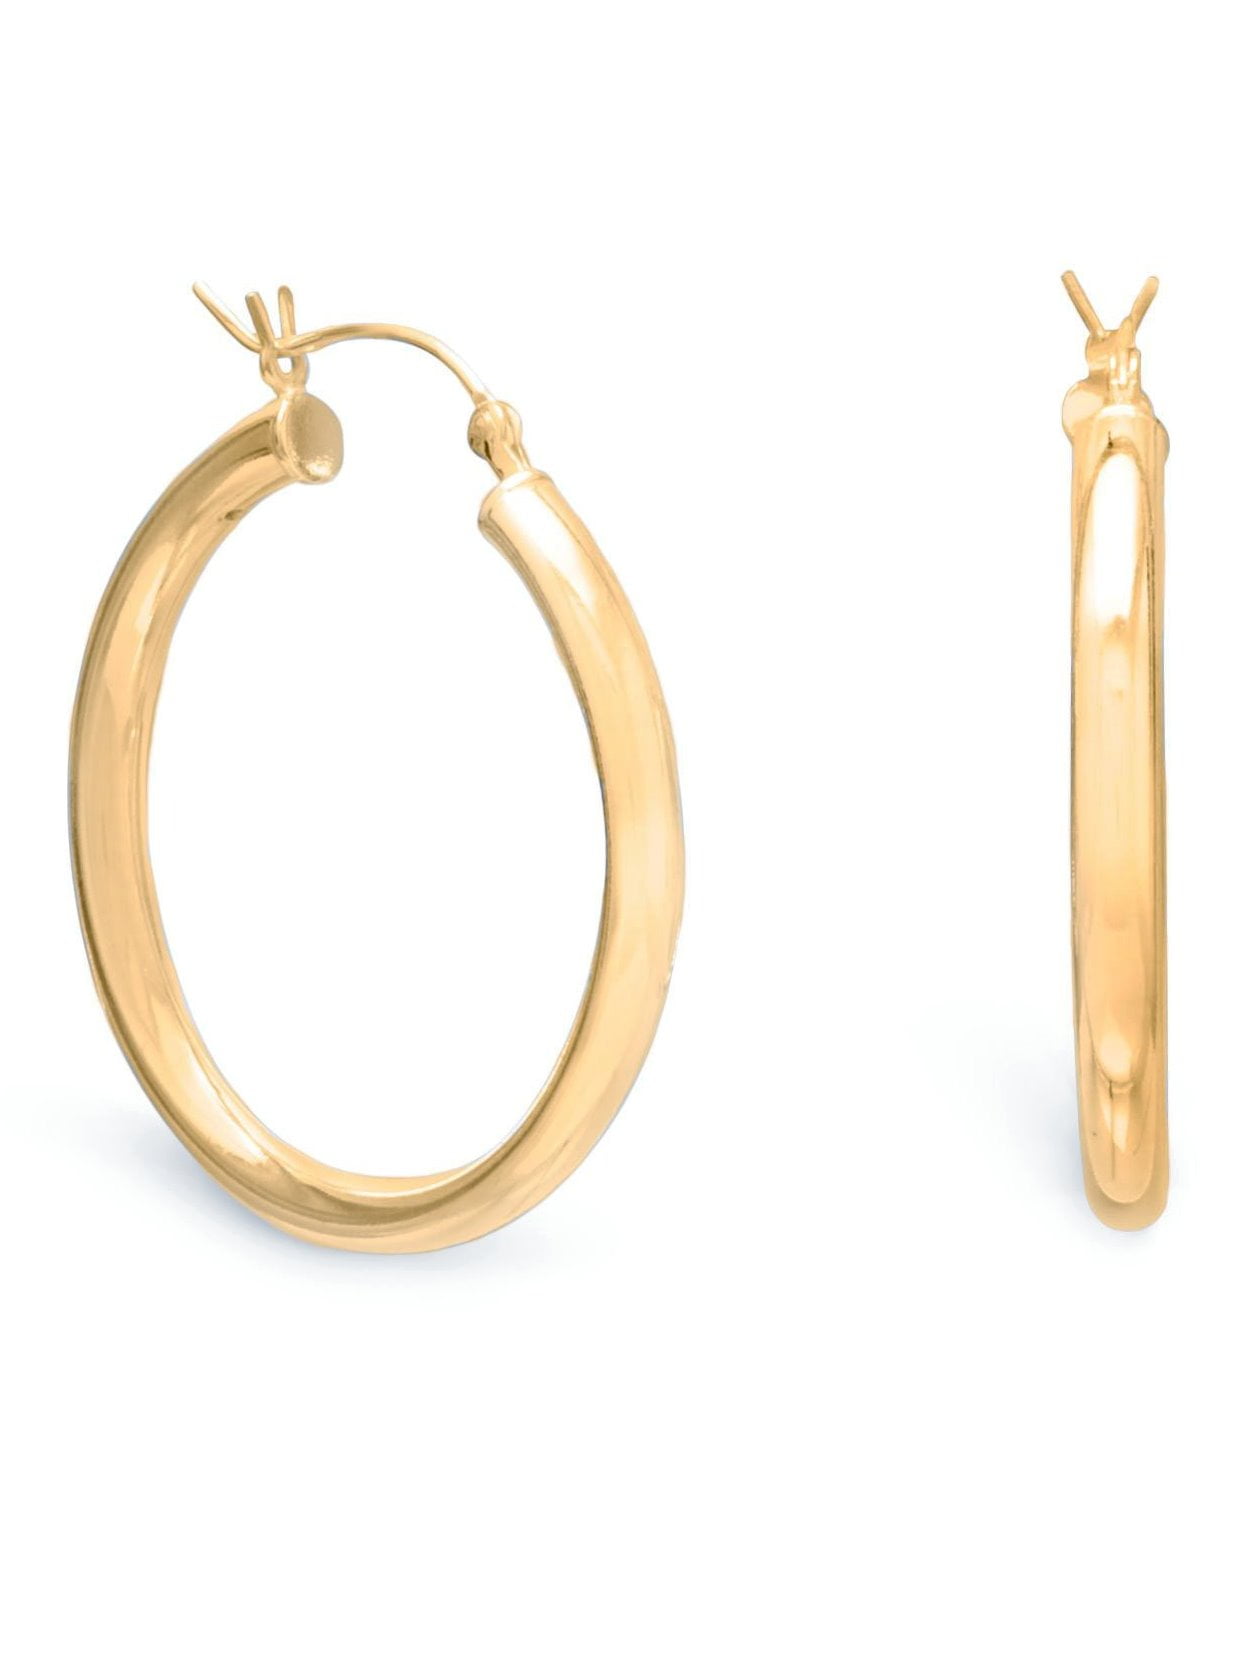 Round Hoops Round Hoops 30mm X 2mm Three Tone 18K Gold Plated Hoops 